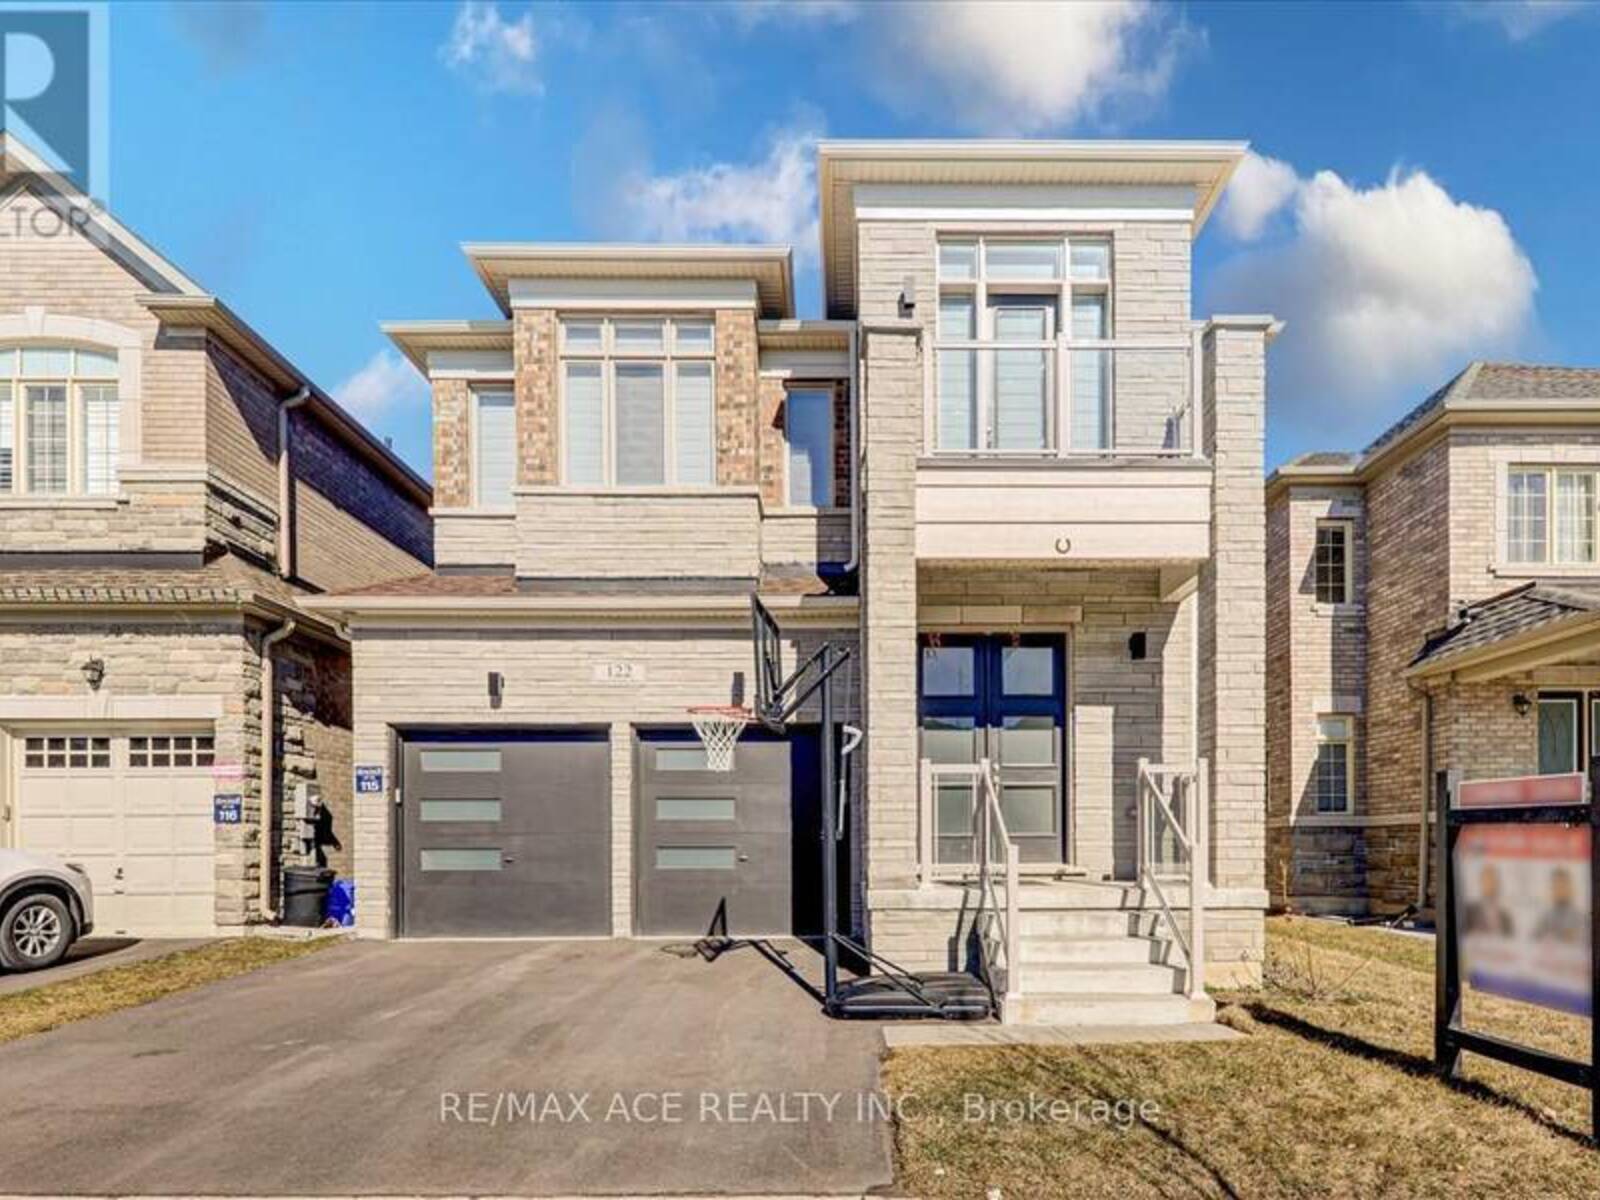 122 STEAM WHISTLE DR, Whitchurch-Stouffville, Ontario L4A 4X5